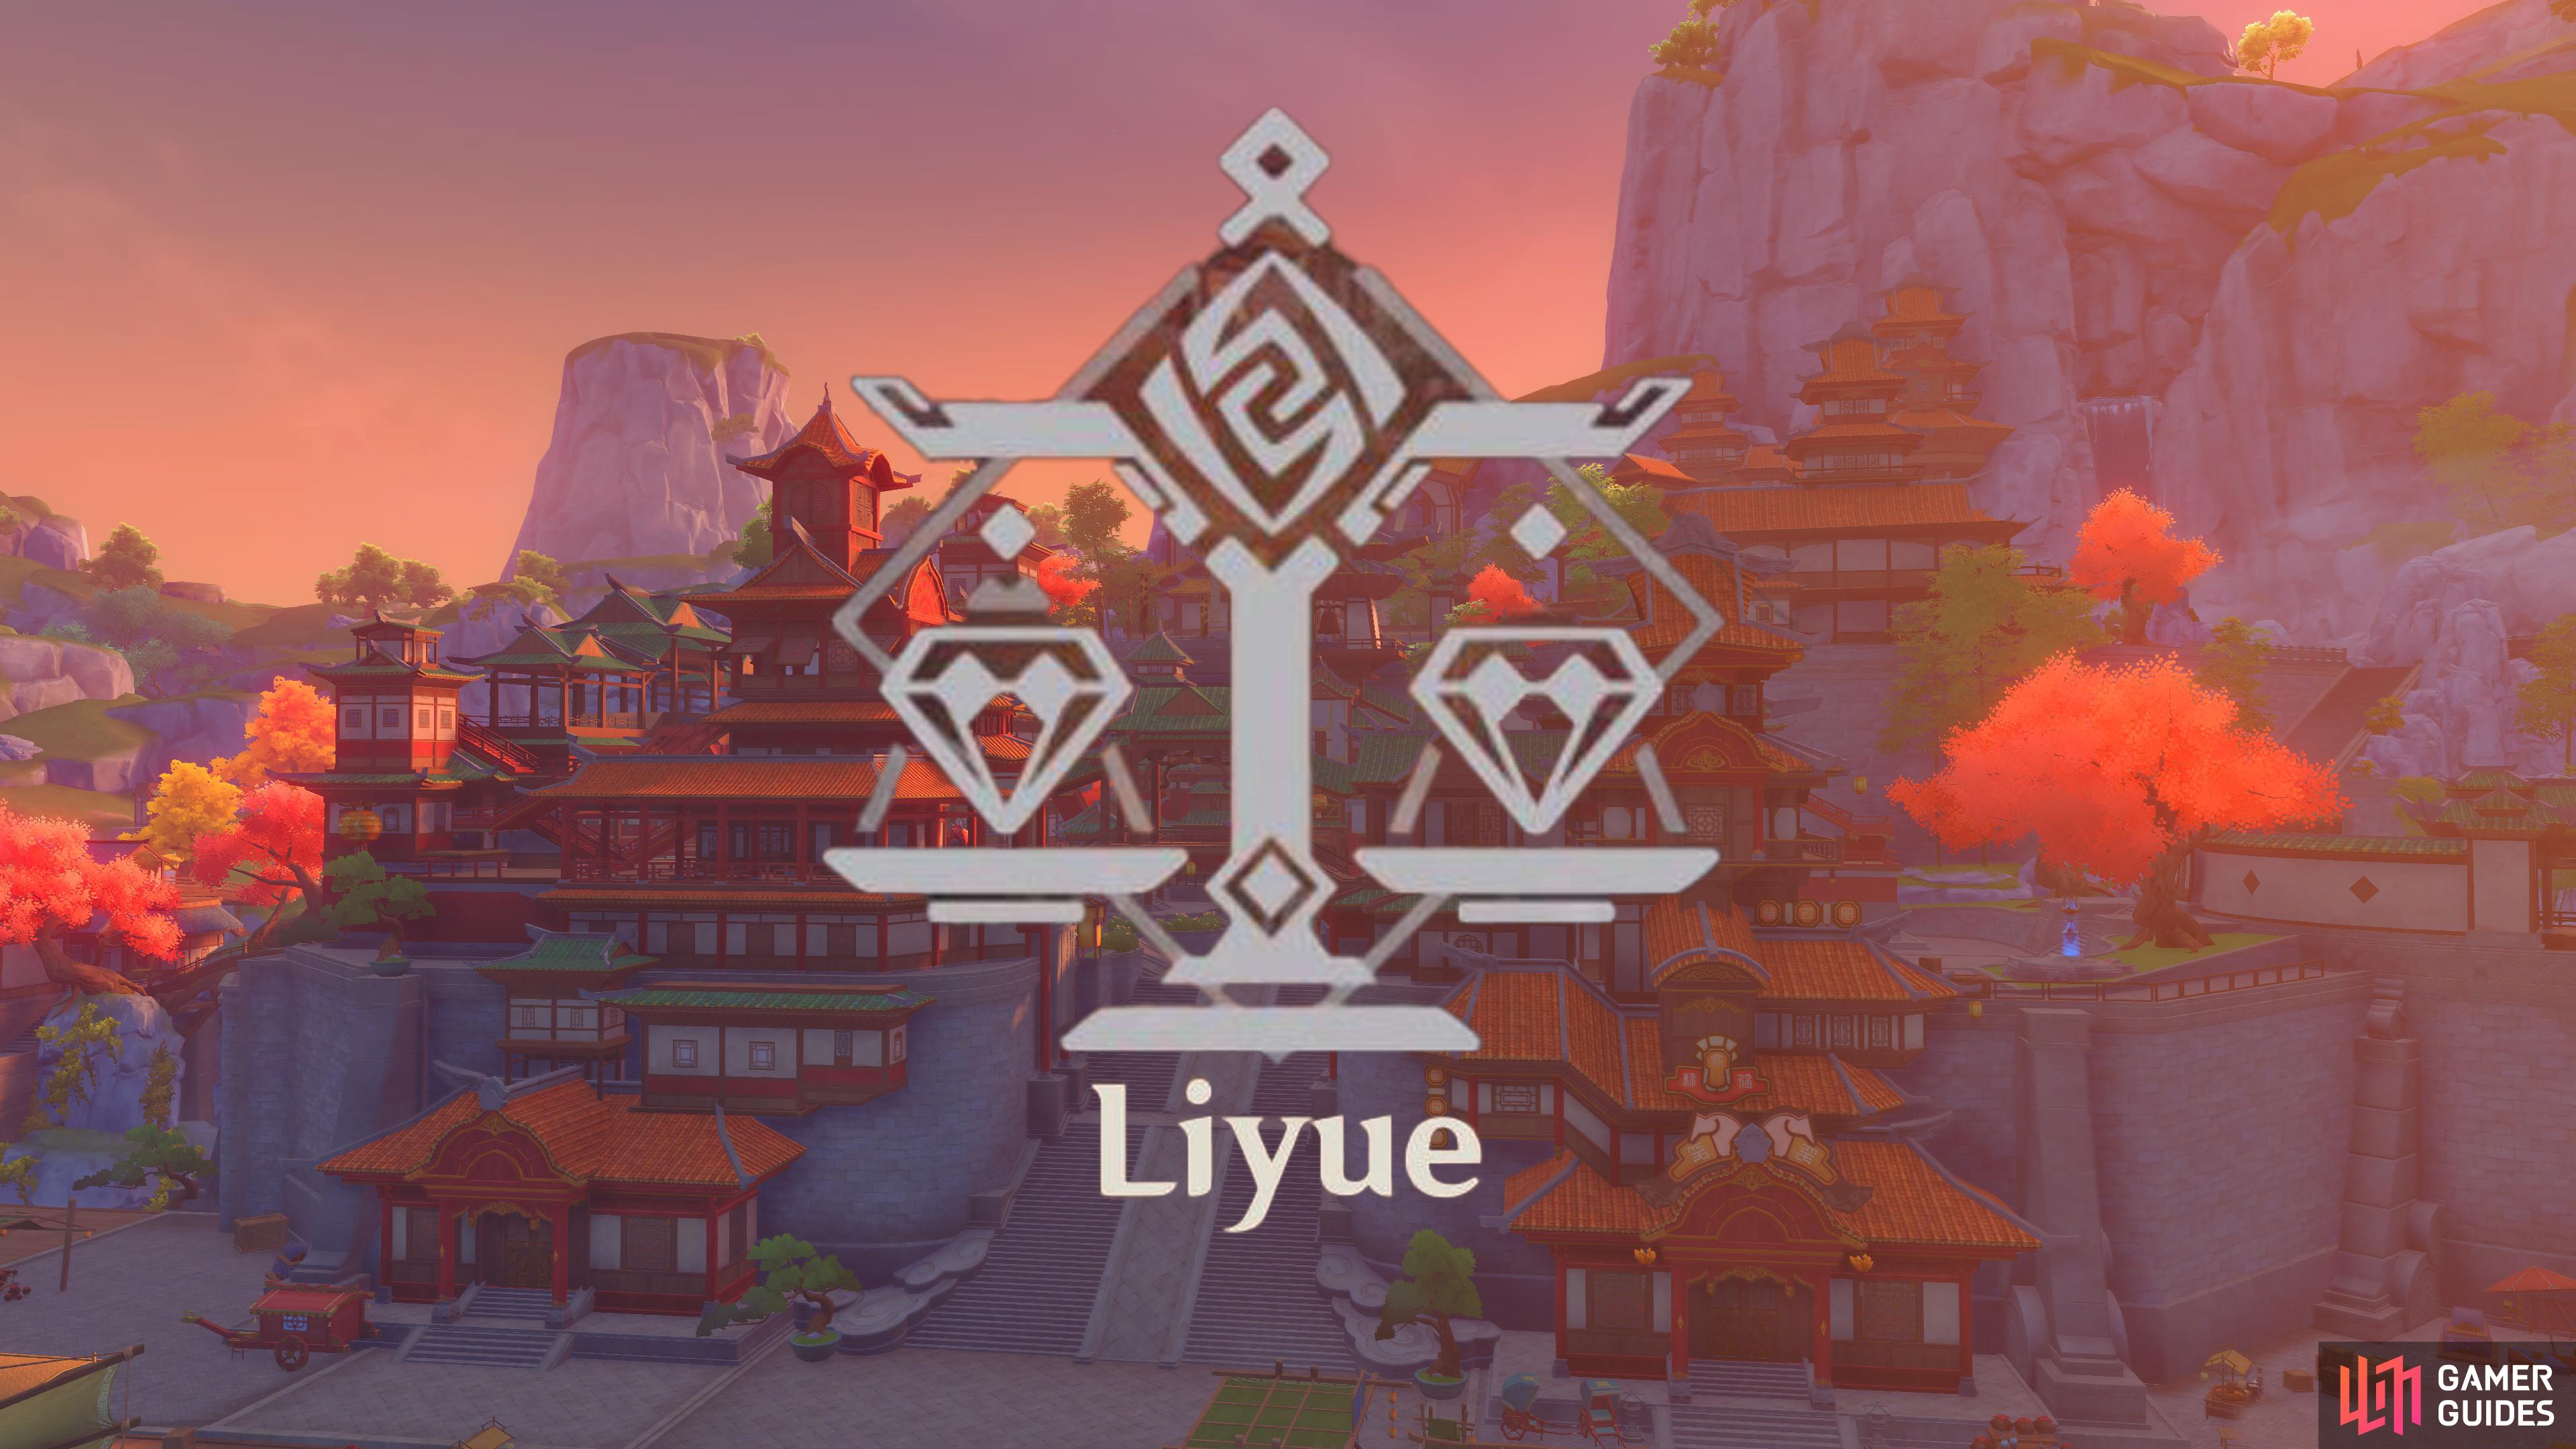 After you’re done with Mondstadt for the time being, you’ll head west to Liyue.